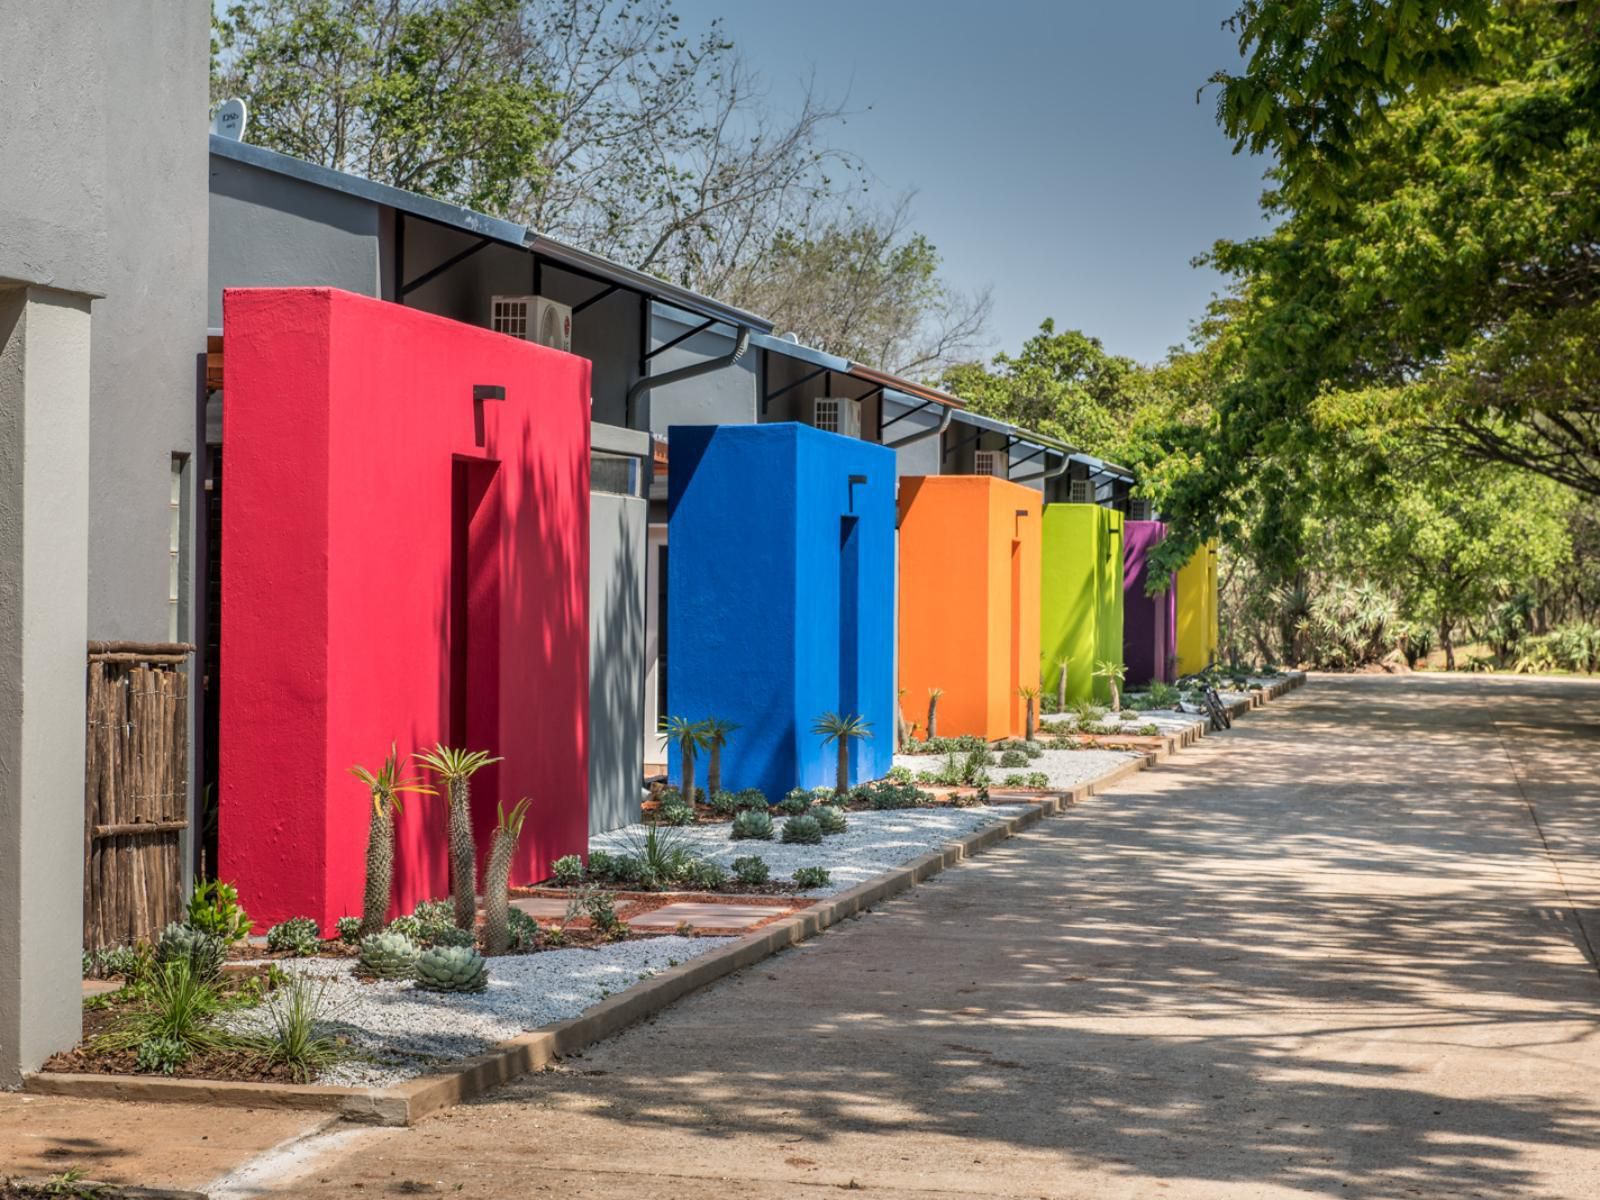 Bluemere Living White River Mpumalanga South Africa Shipping Container